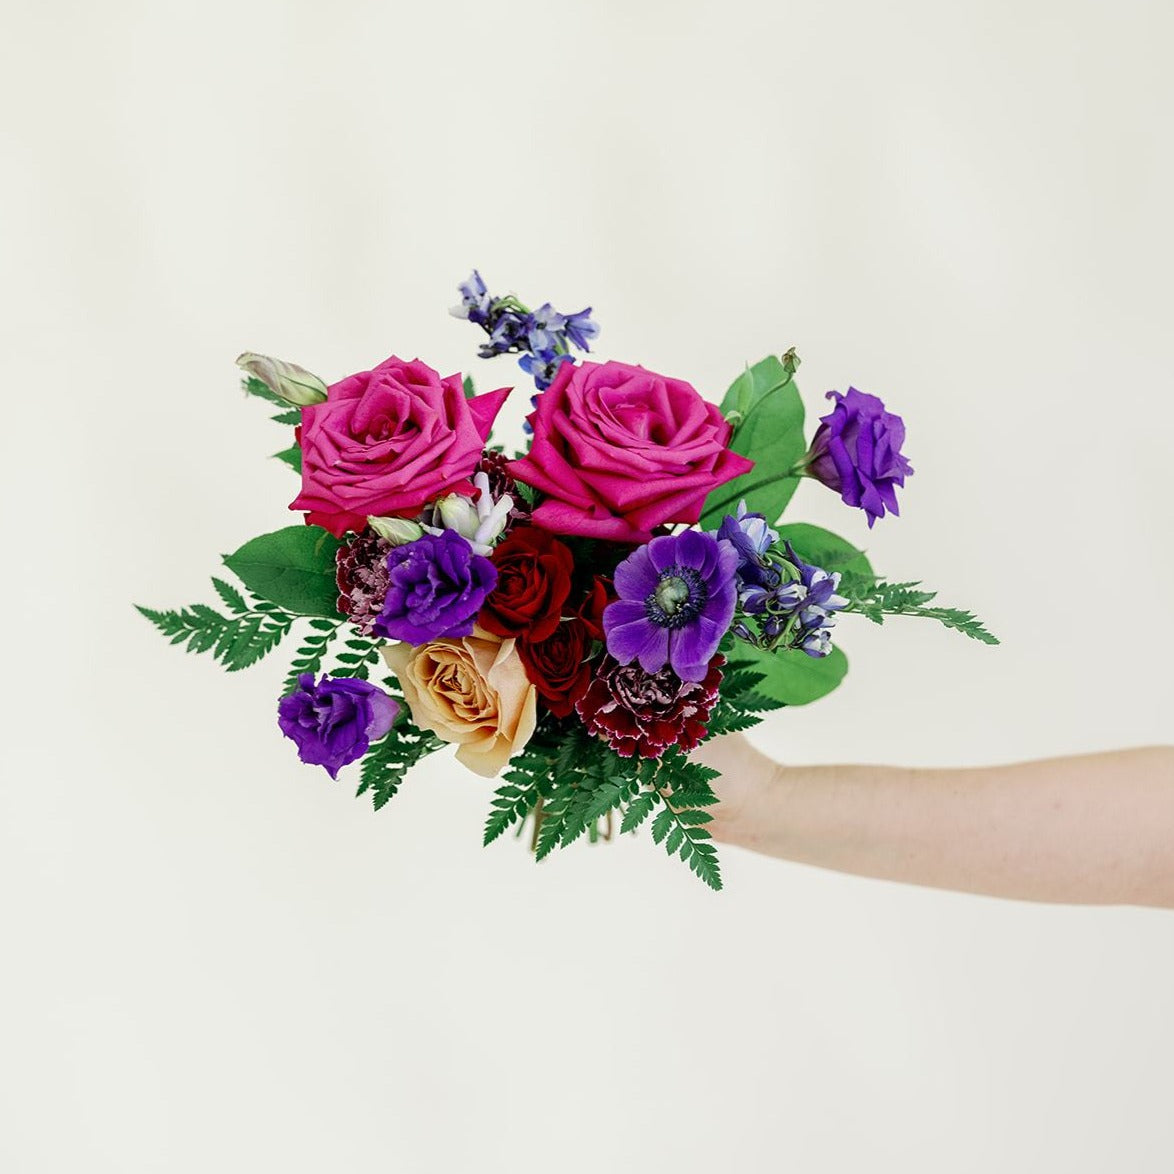 Jewel Toned Bridesmaid Bouquet for DIY Wedding Flowers by Flower Moxie